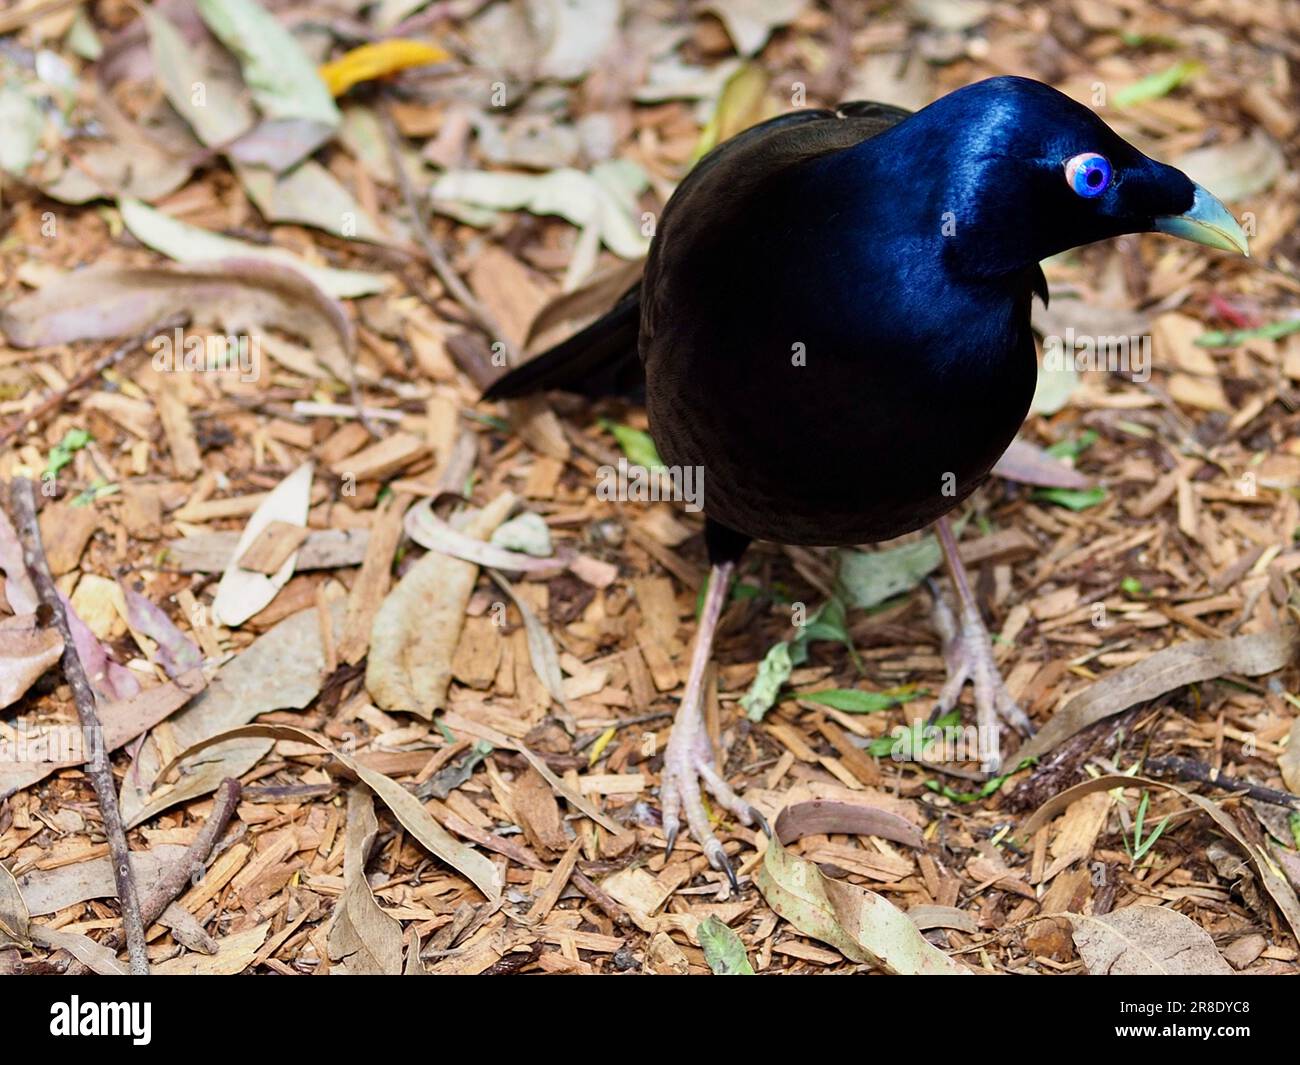 Splendid dazzling male Satin Bowerbird with remarkable eyes and striking plumage. Stock Photo